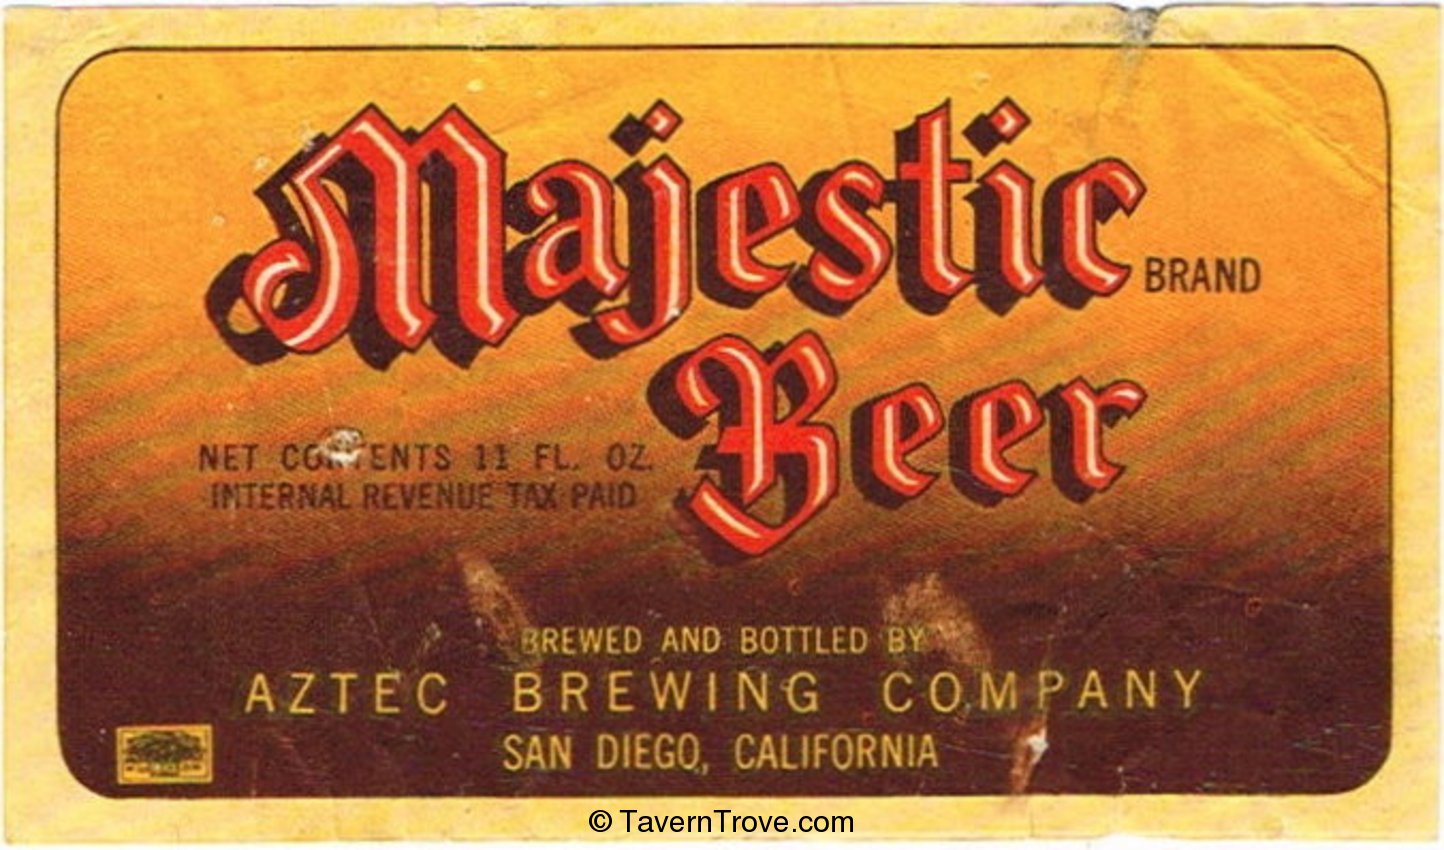 Majestic Beer